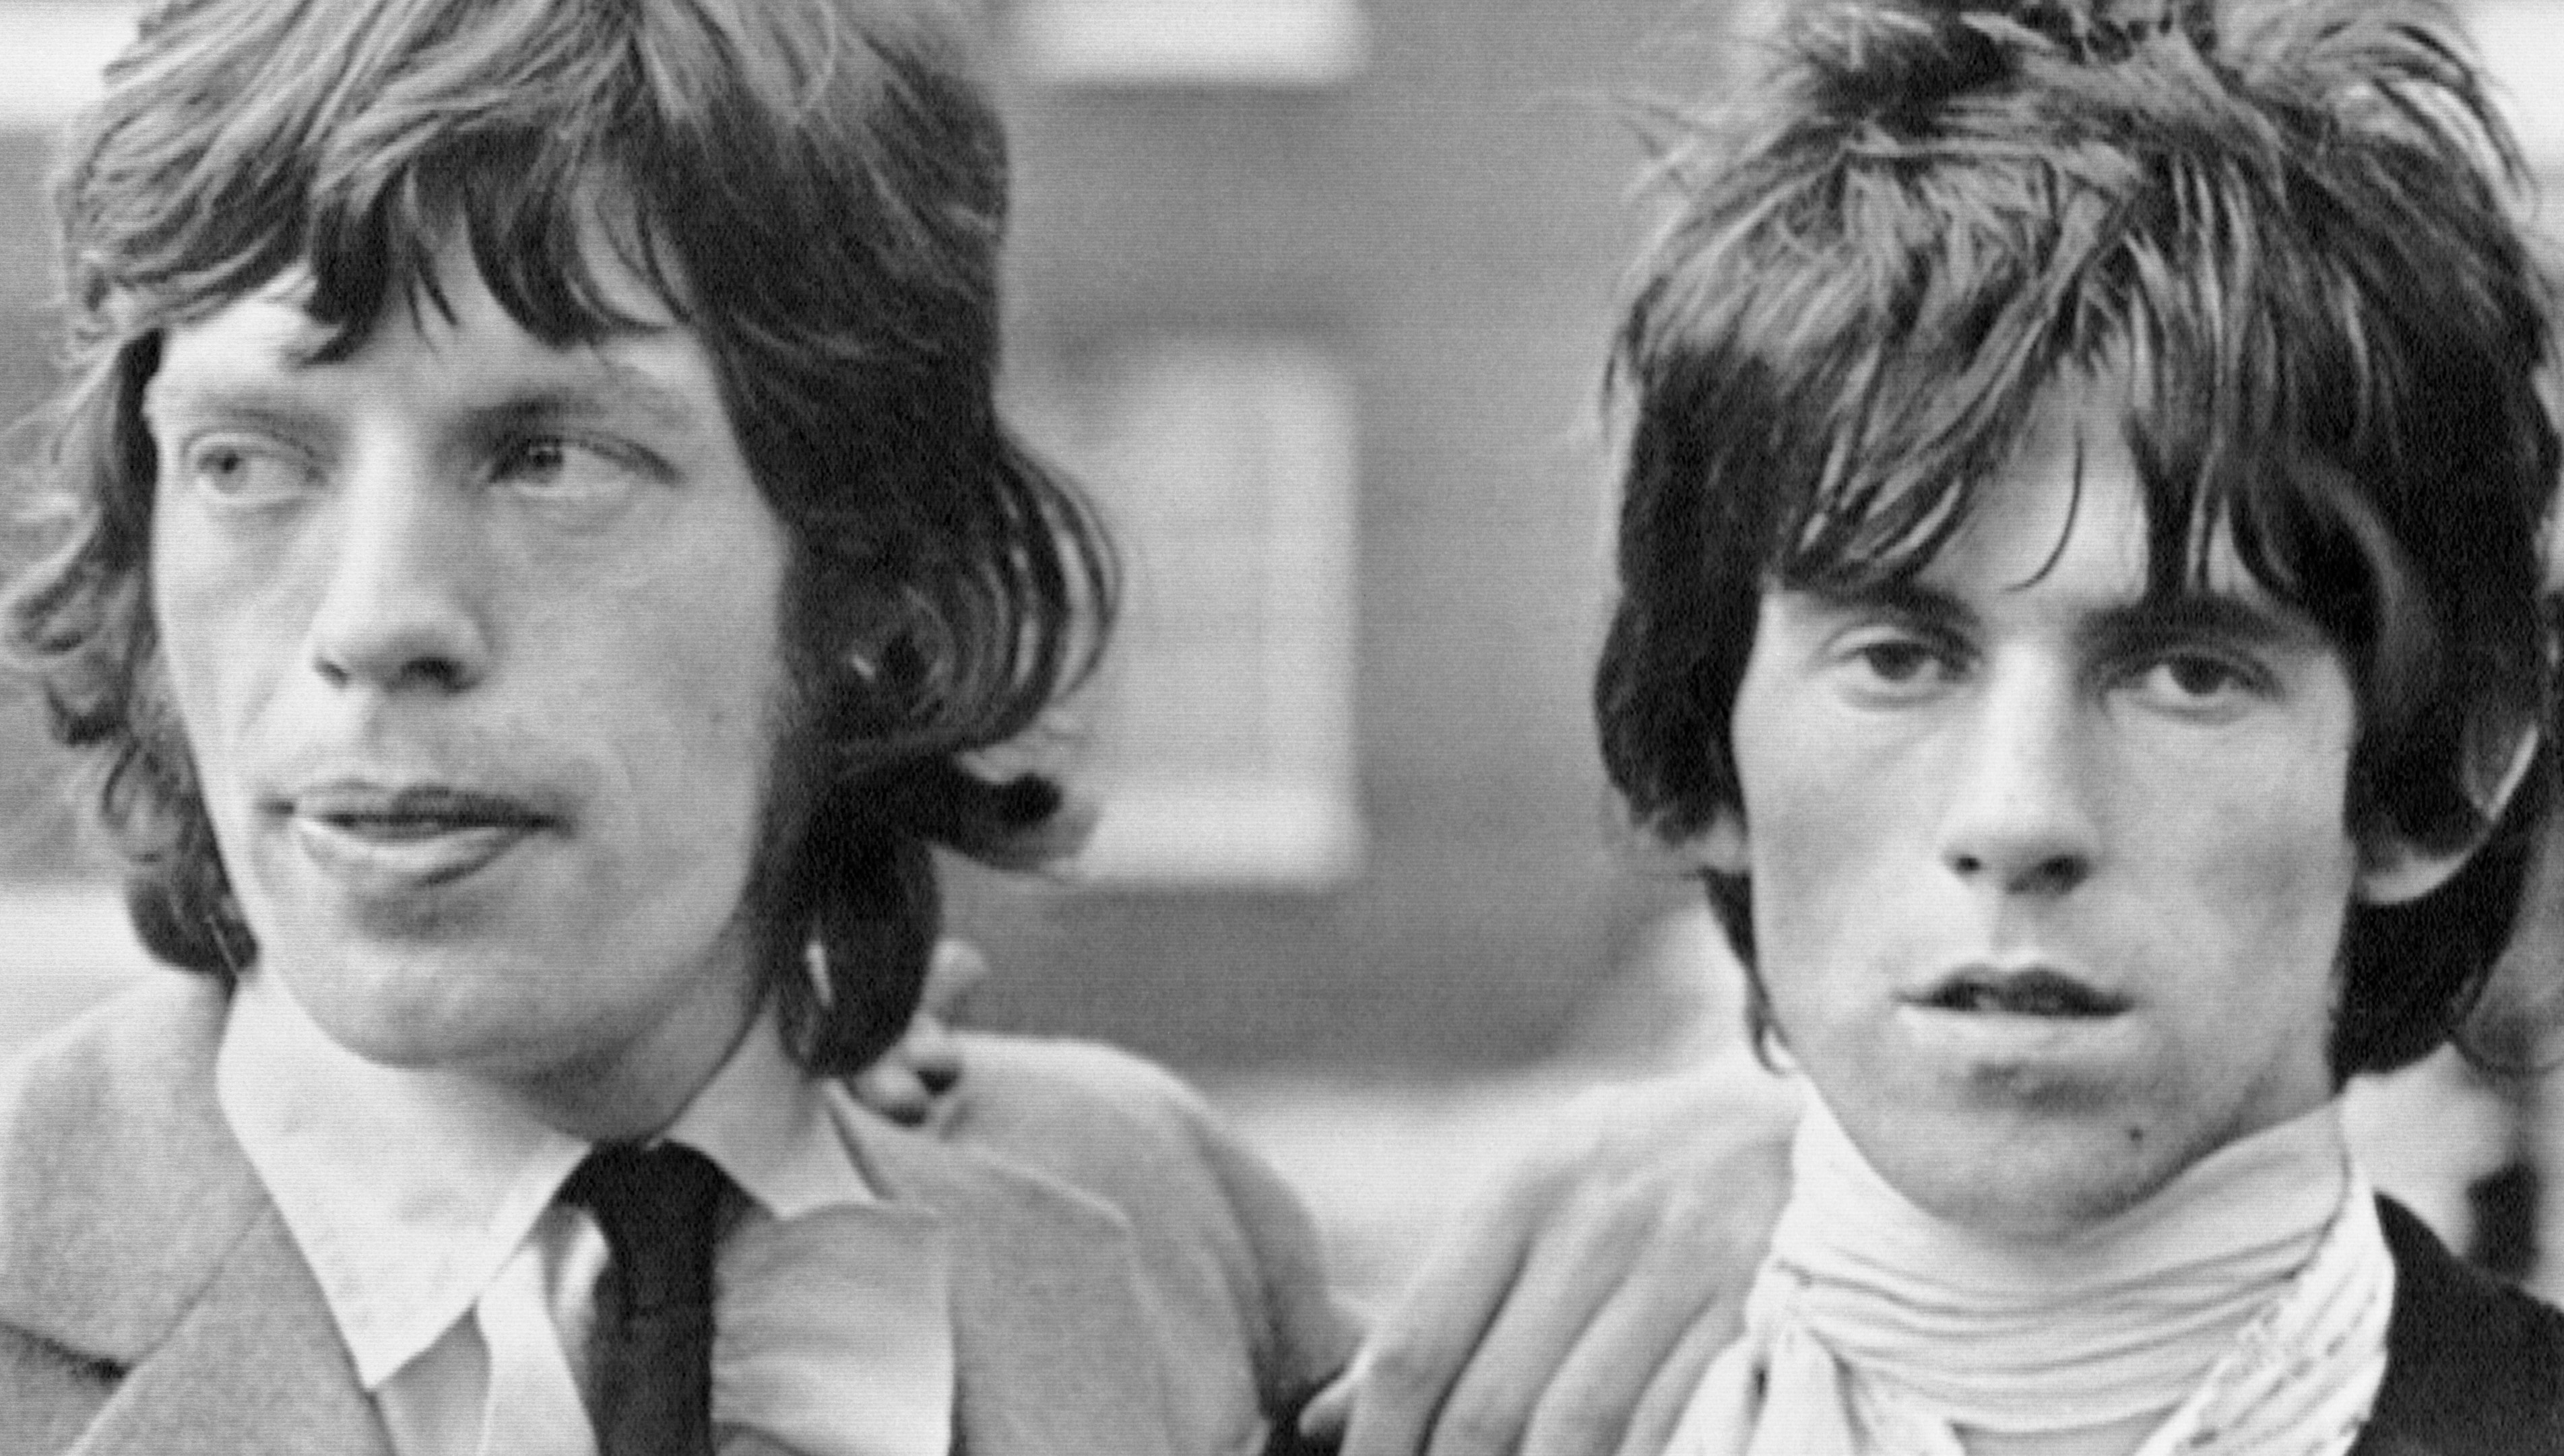 The Rolling Stones’ Mick Jagger and Keith Richards in front of a building